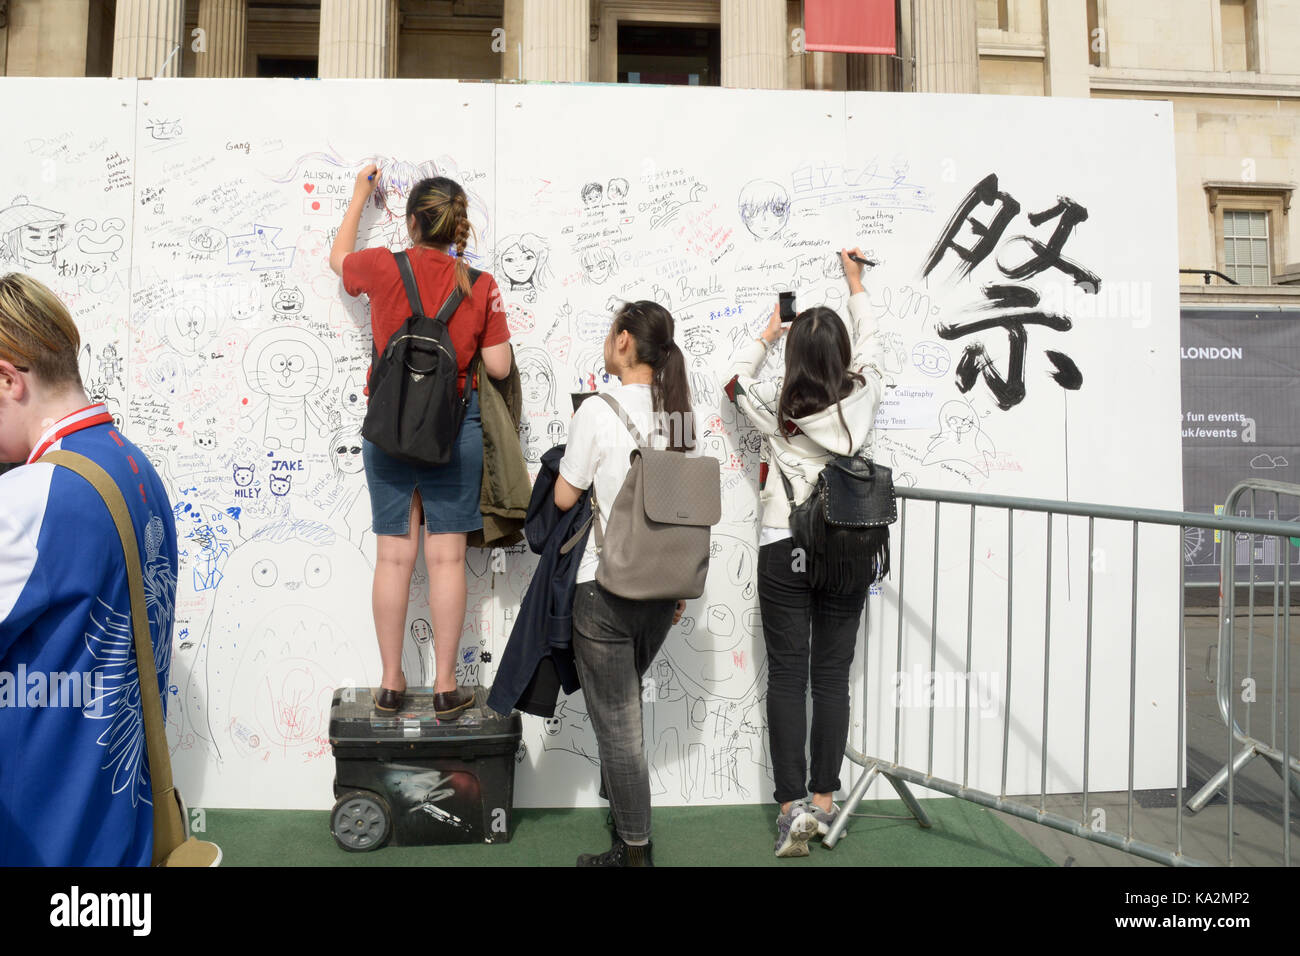 London, England. 24 September 2017: Children drawing and signing their names on the graffiti wall at the Japan Matsuri Festival in Trafalgar Square, London England. Martin Parker/Alamy Live News Stock Photo